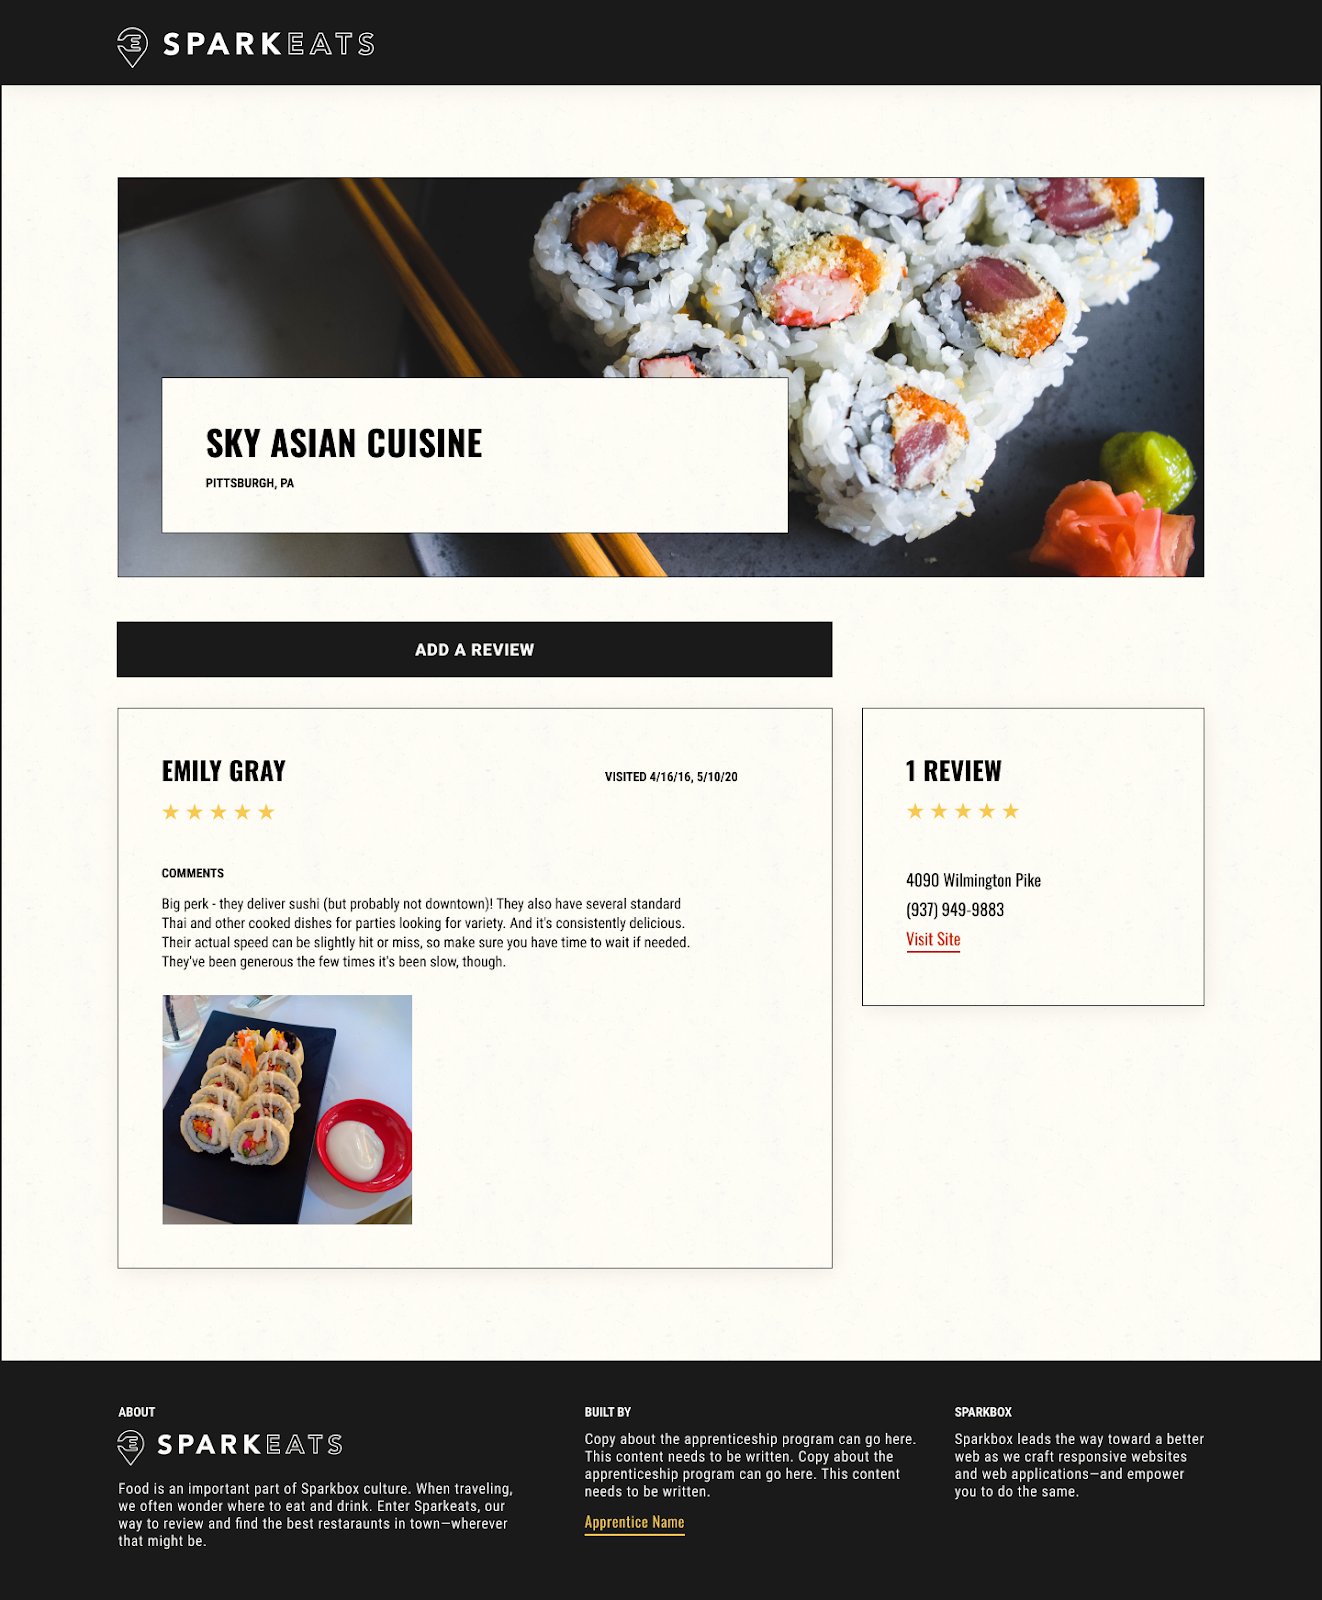 A page for a resturant called Sky Asian Cuisine on the SparkEats website. The page includes several components, including a cover image, a title, a review, and a box of restaurant details.